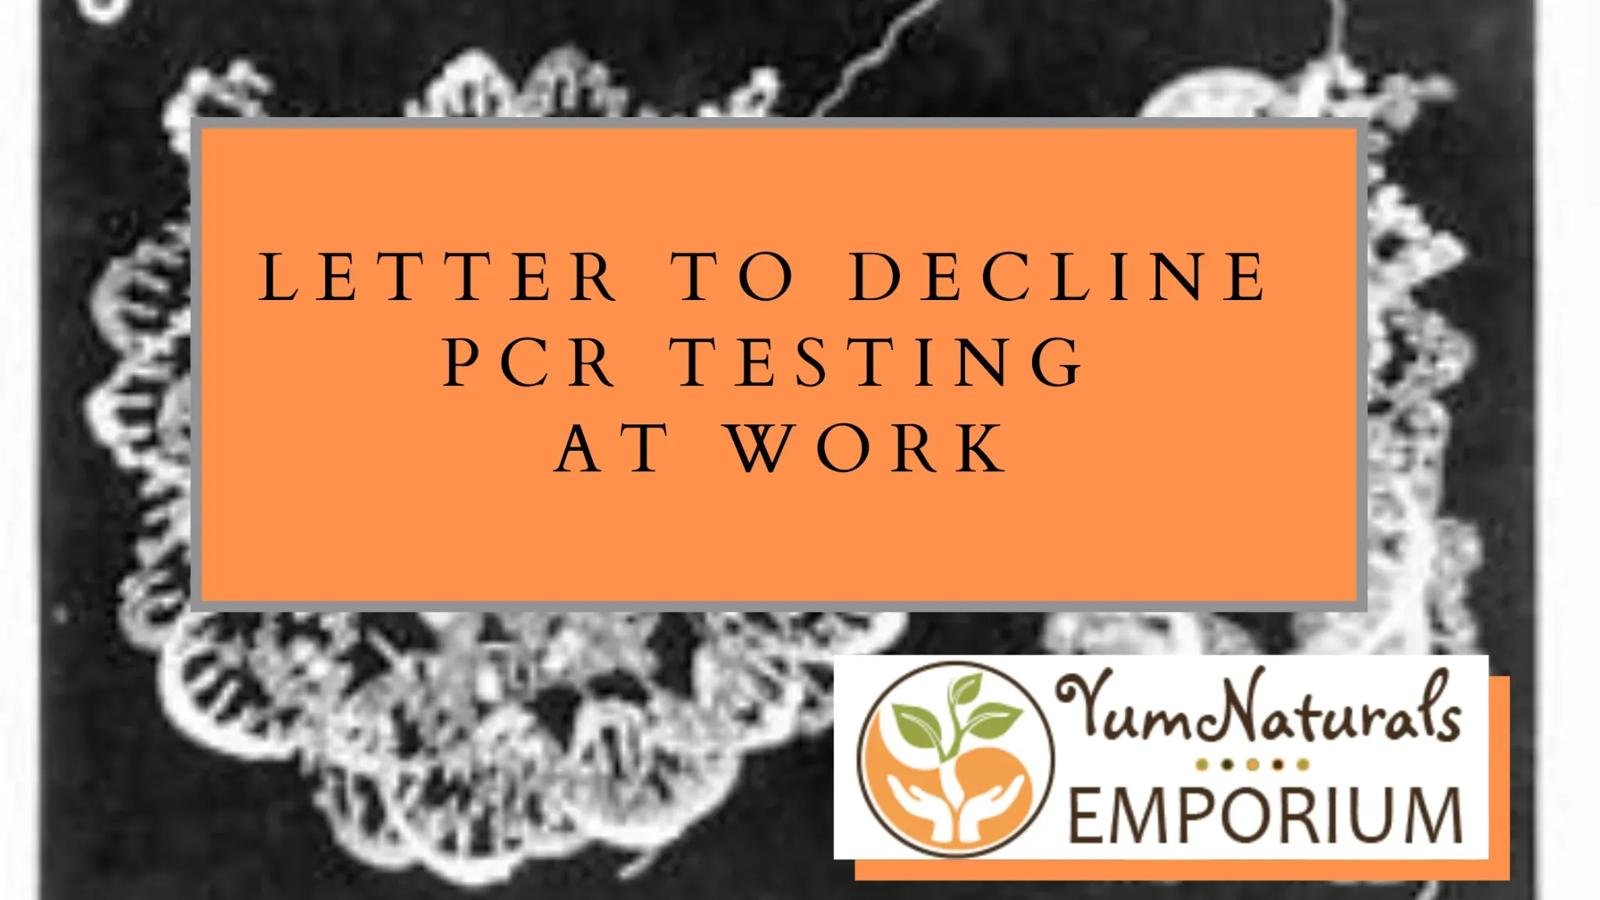 Yummy-Doctor-Holistic-Health-Education-Blog-Letter-to-decline-PCR-testing-at-work